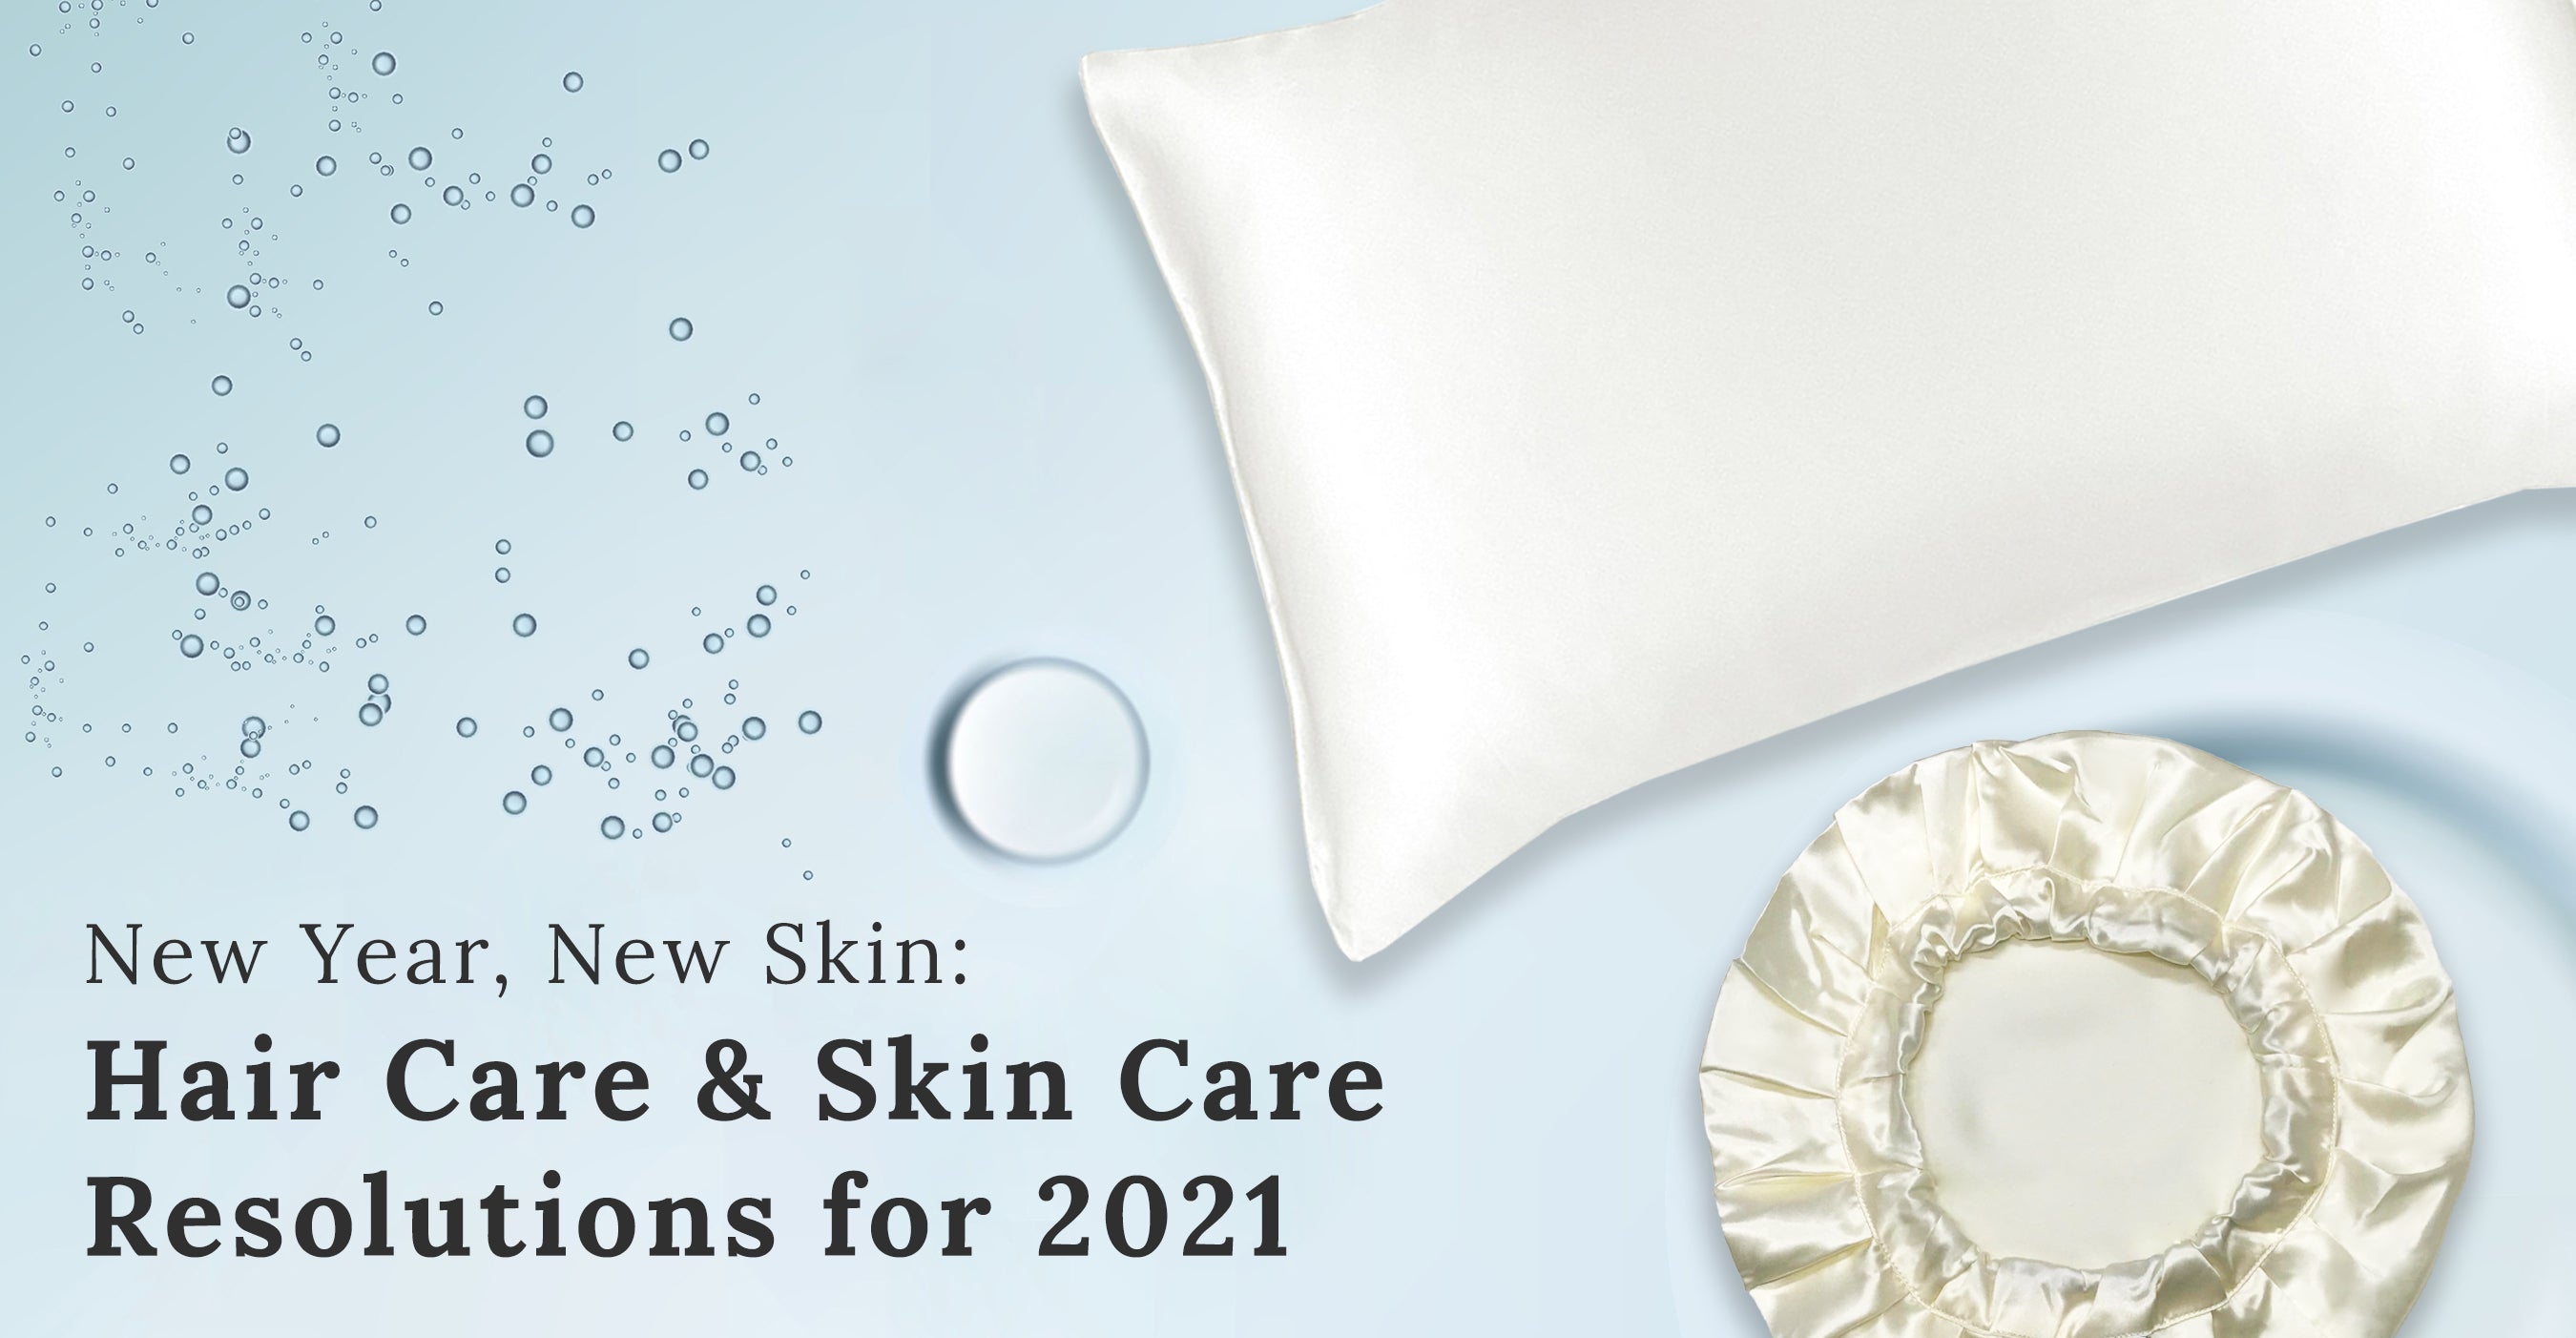 New Year, New Skin: Hair Care & Skin Care Resolutions for 2021